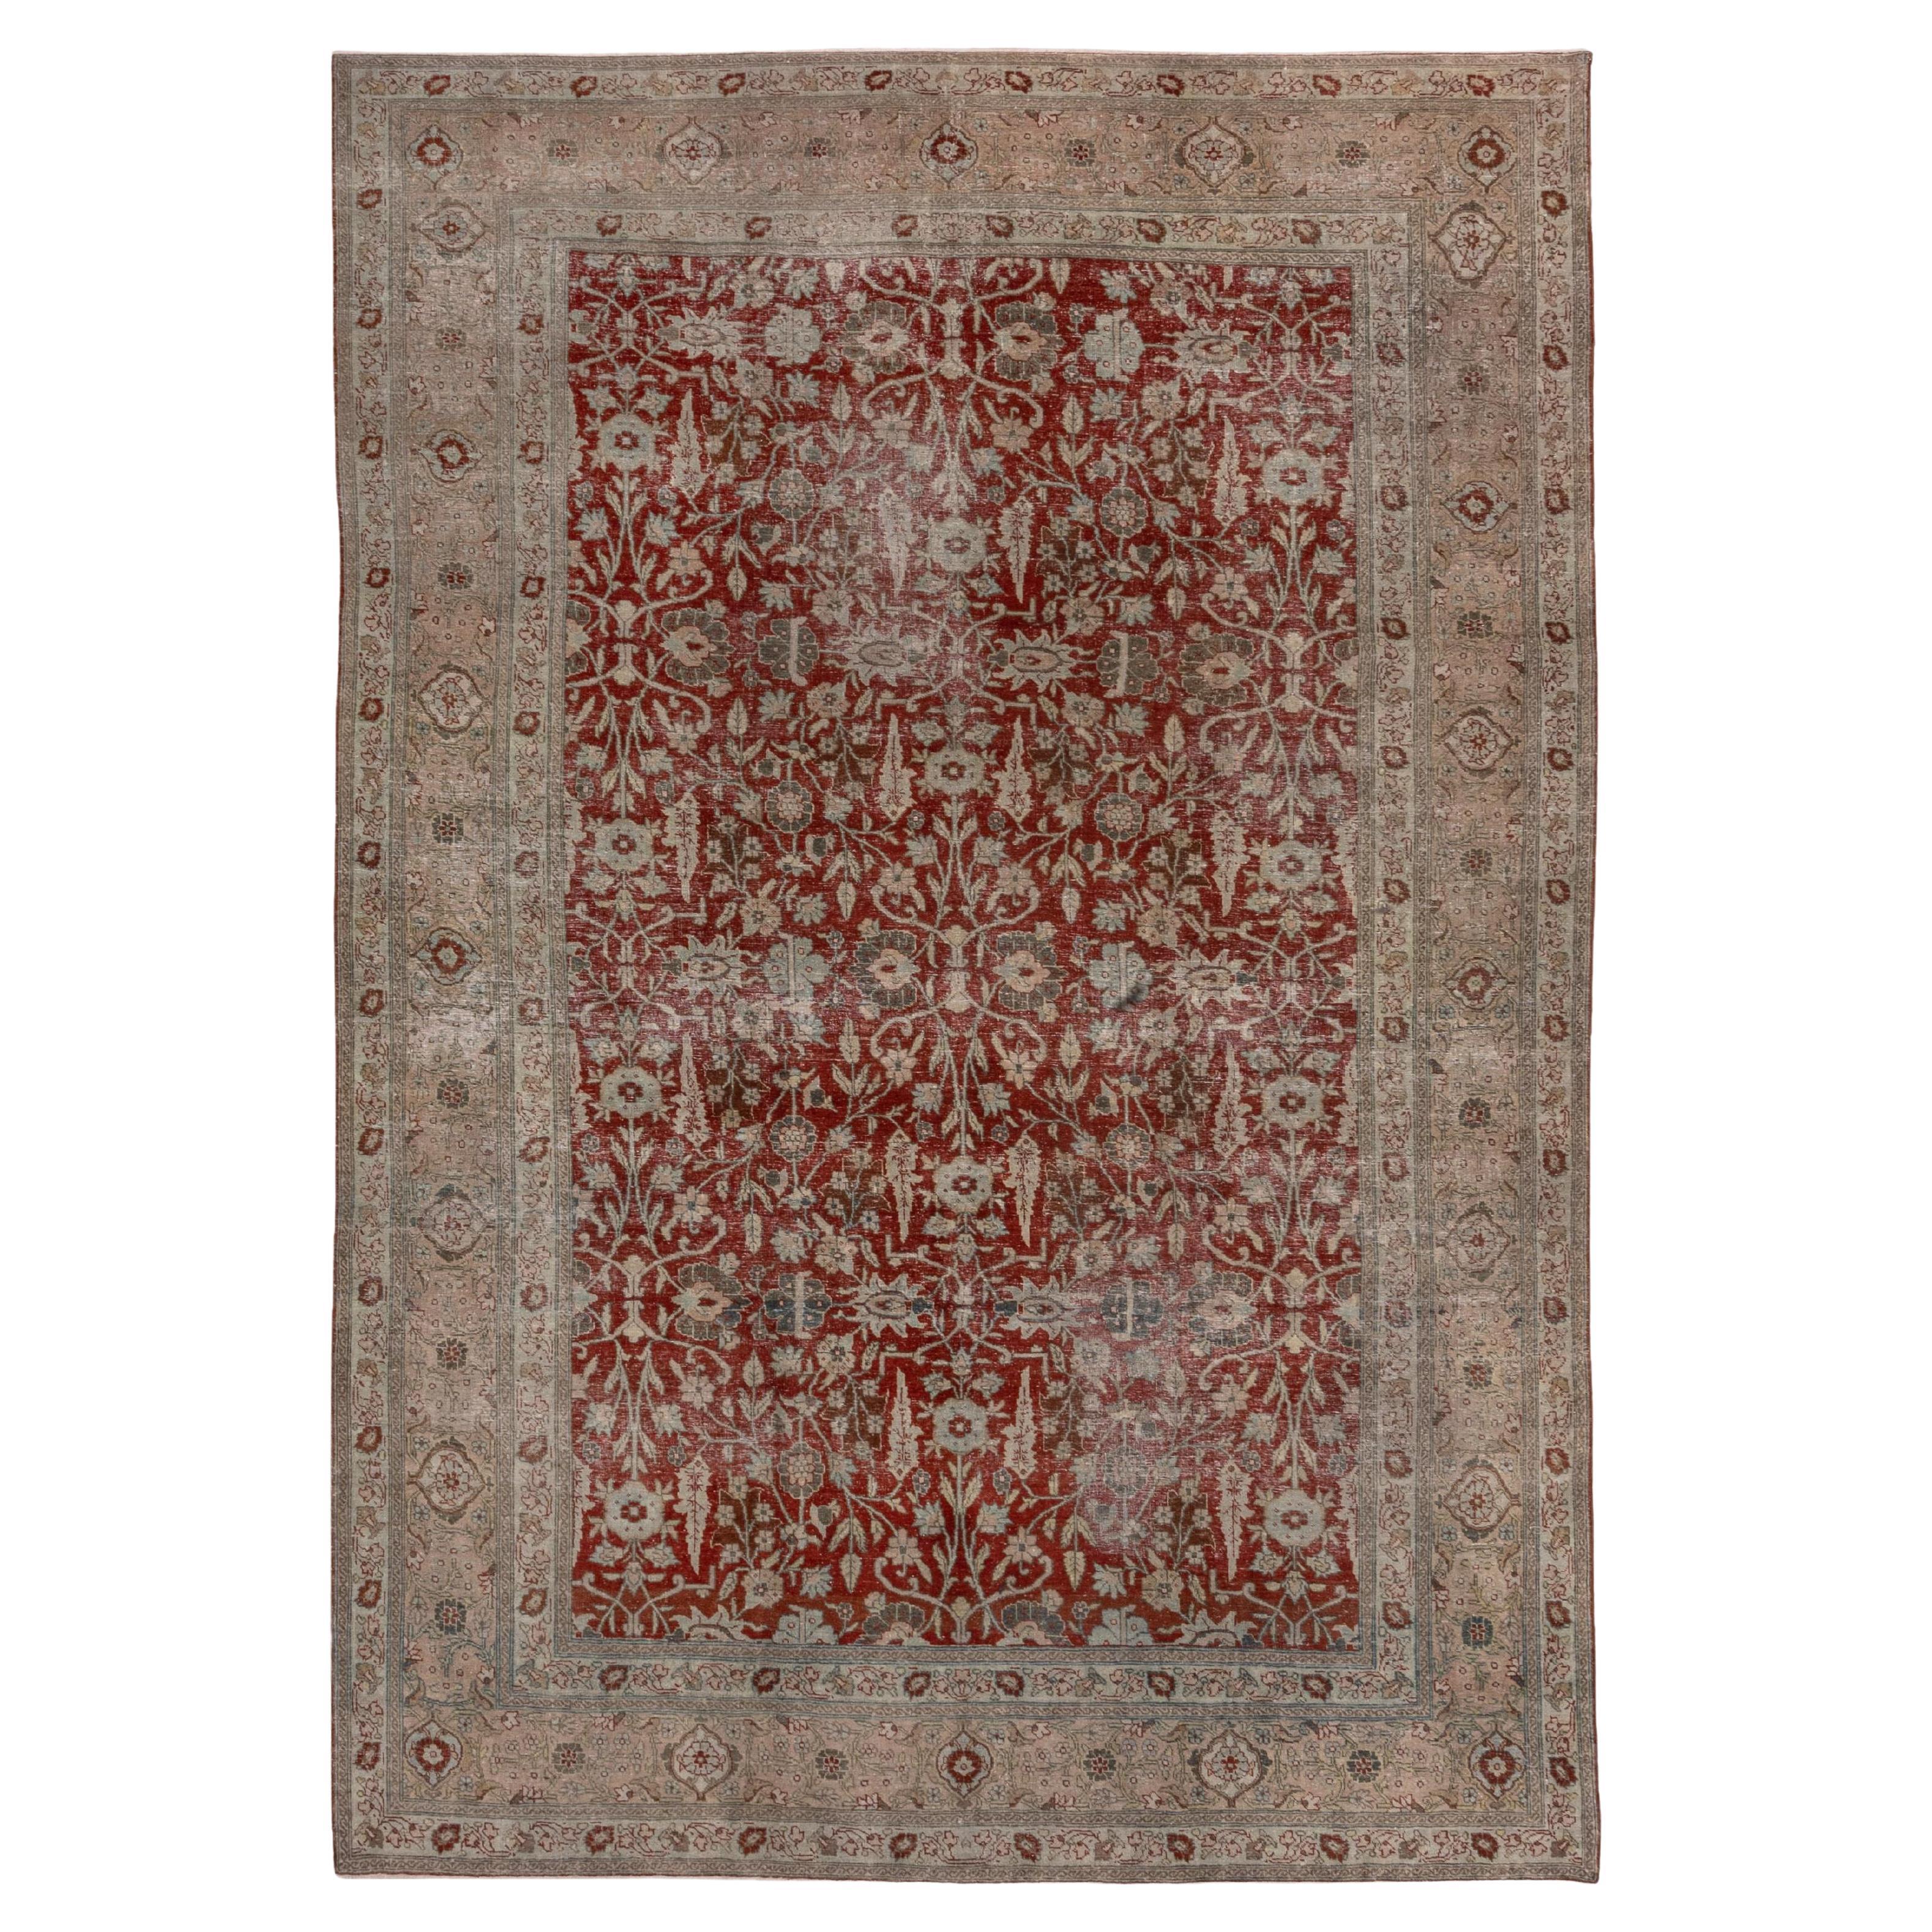 Beautiful Antique Persian Tabriz Rug, Ruby Red Floral Field, Soft Toned Borders